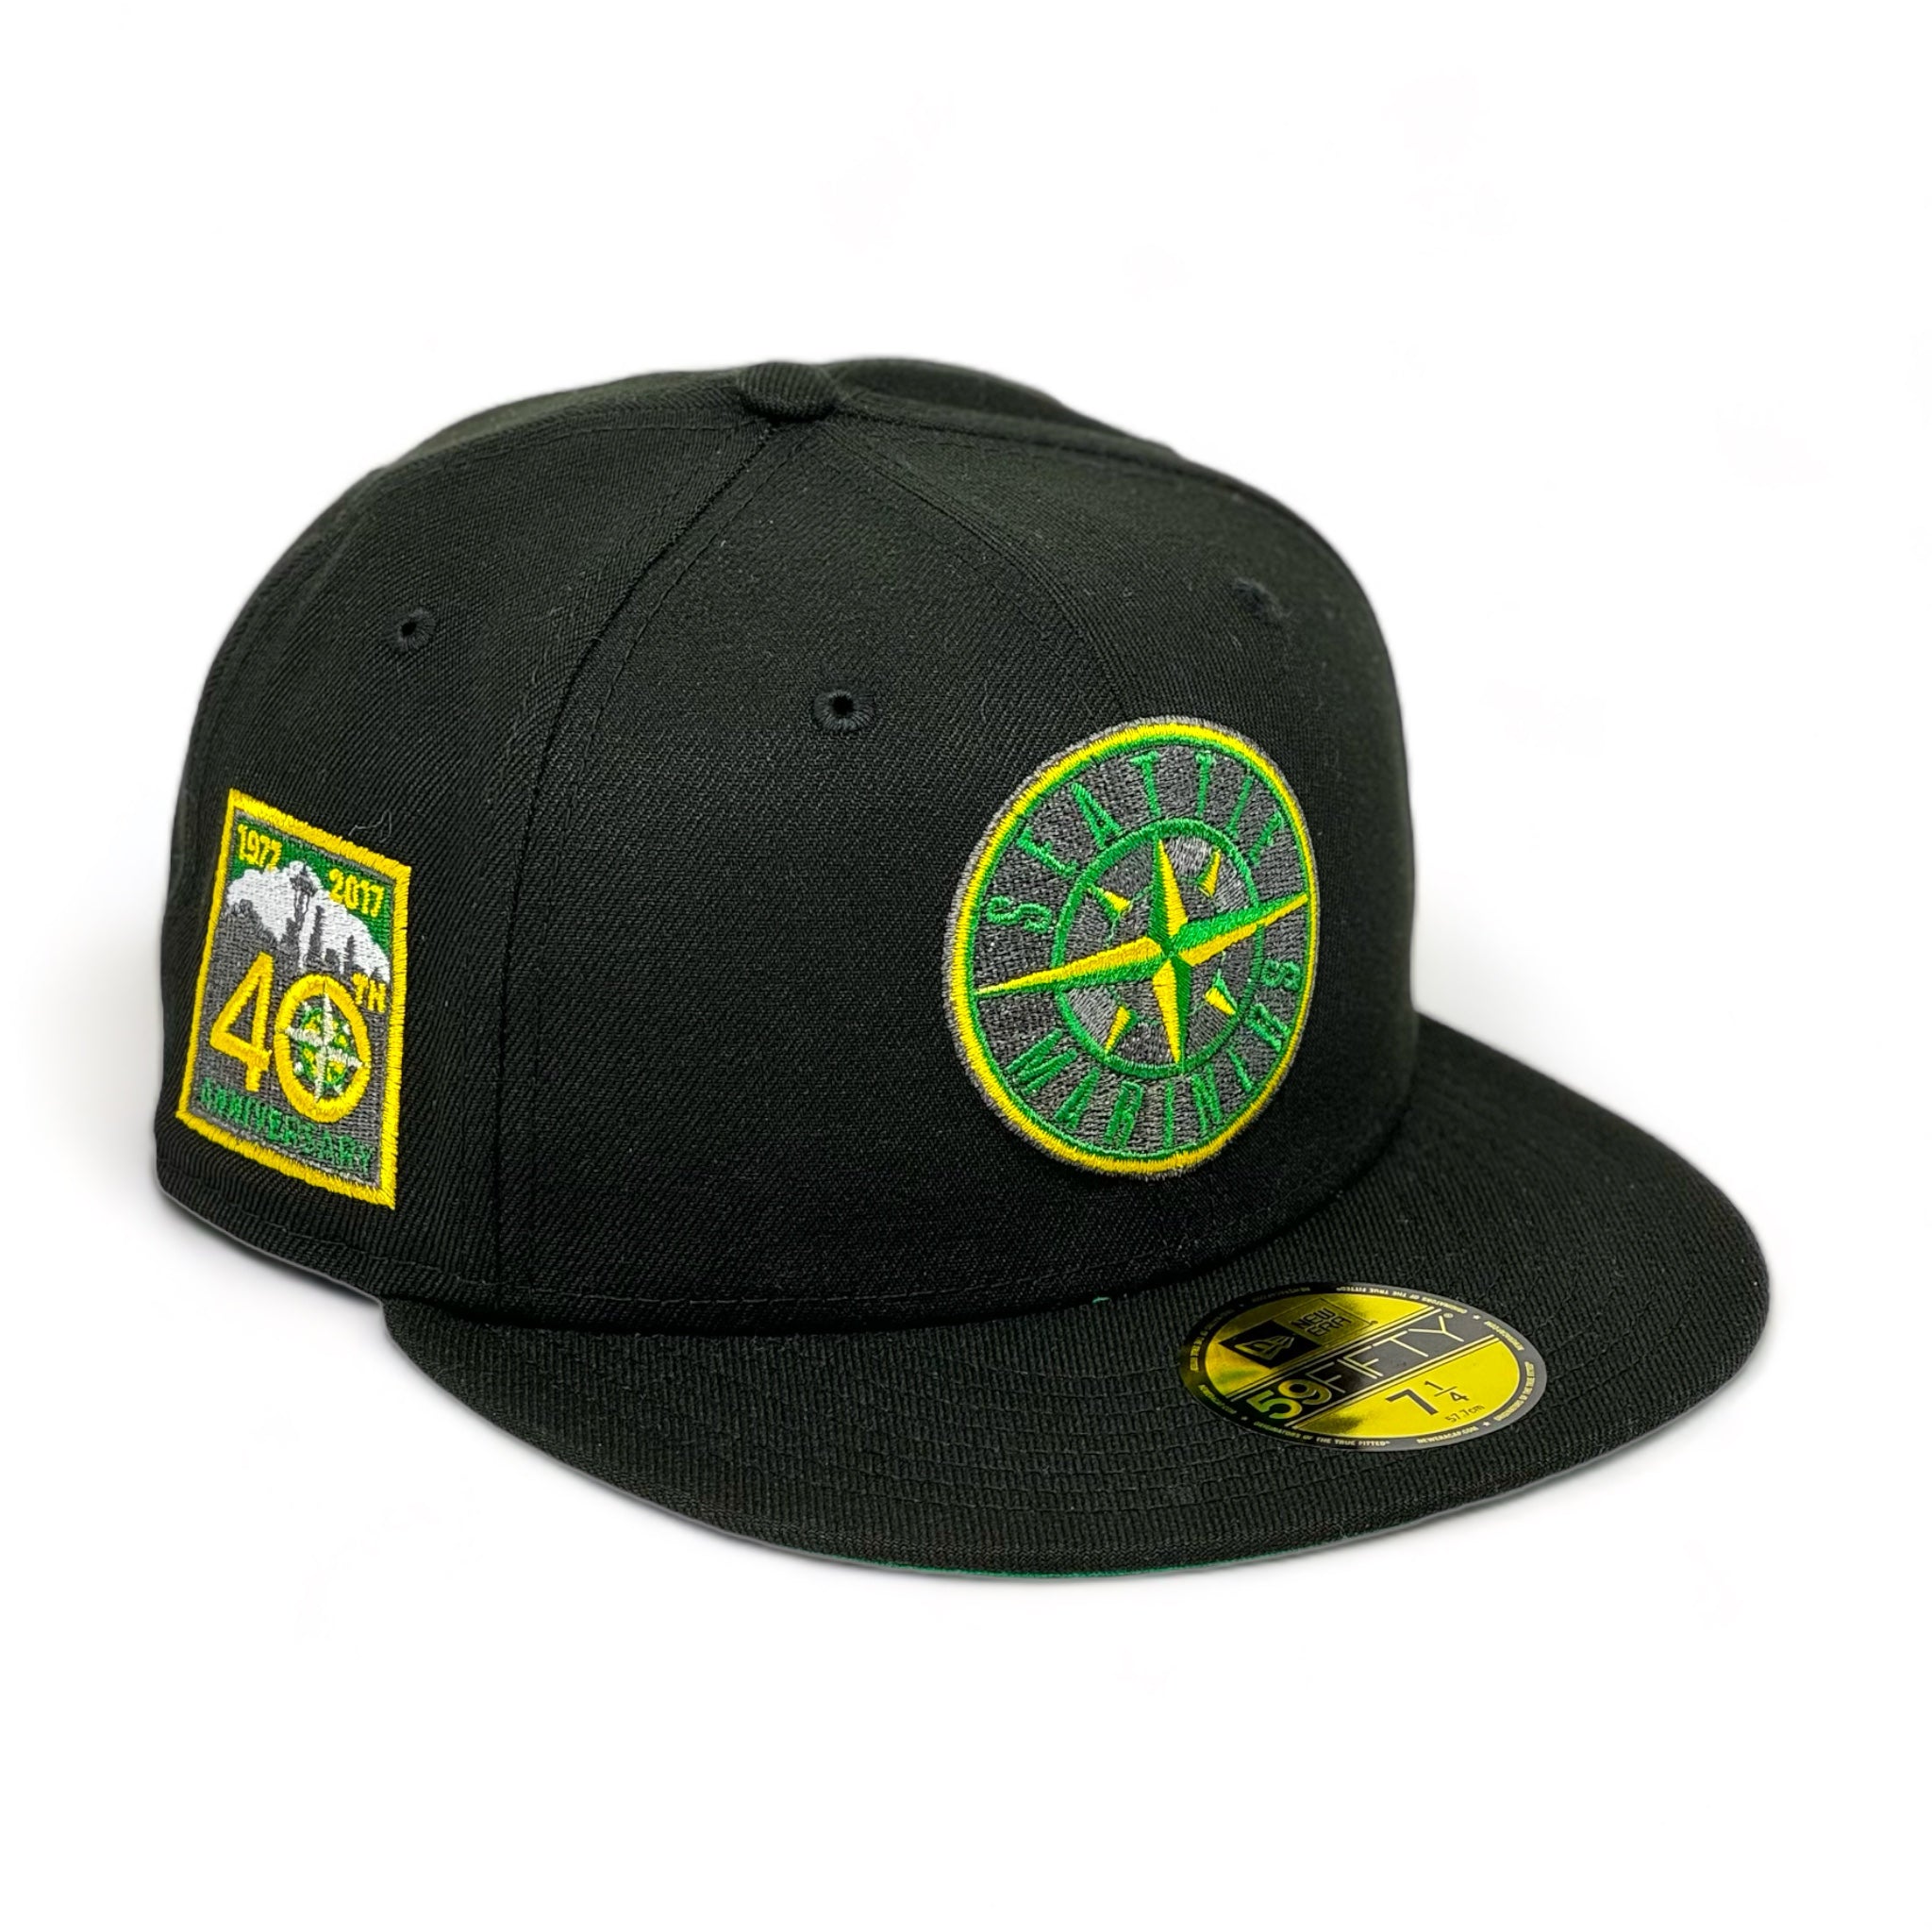 SEATTLE MARINERS (BLACK) (40TH ANN) NEW ERA 59FIFTY FITTED